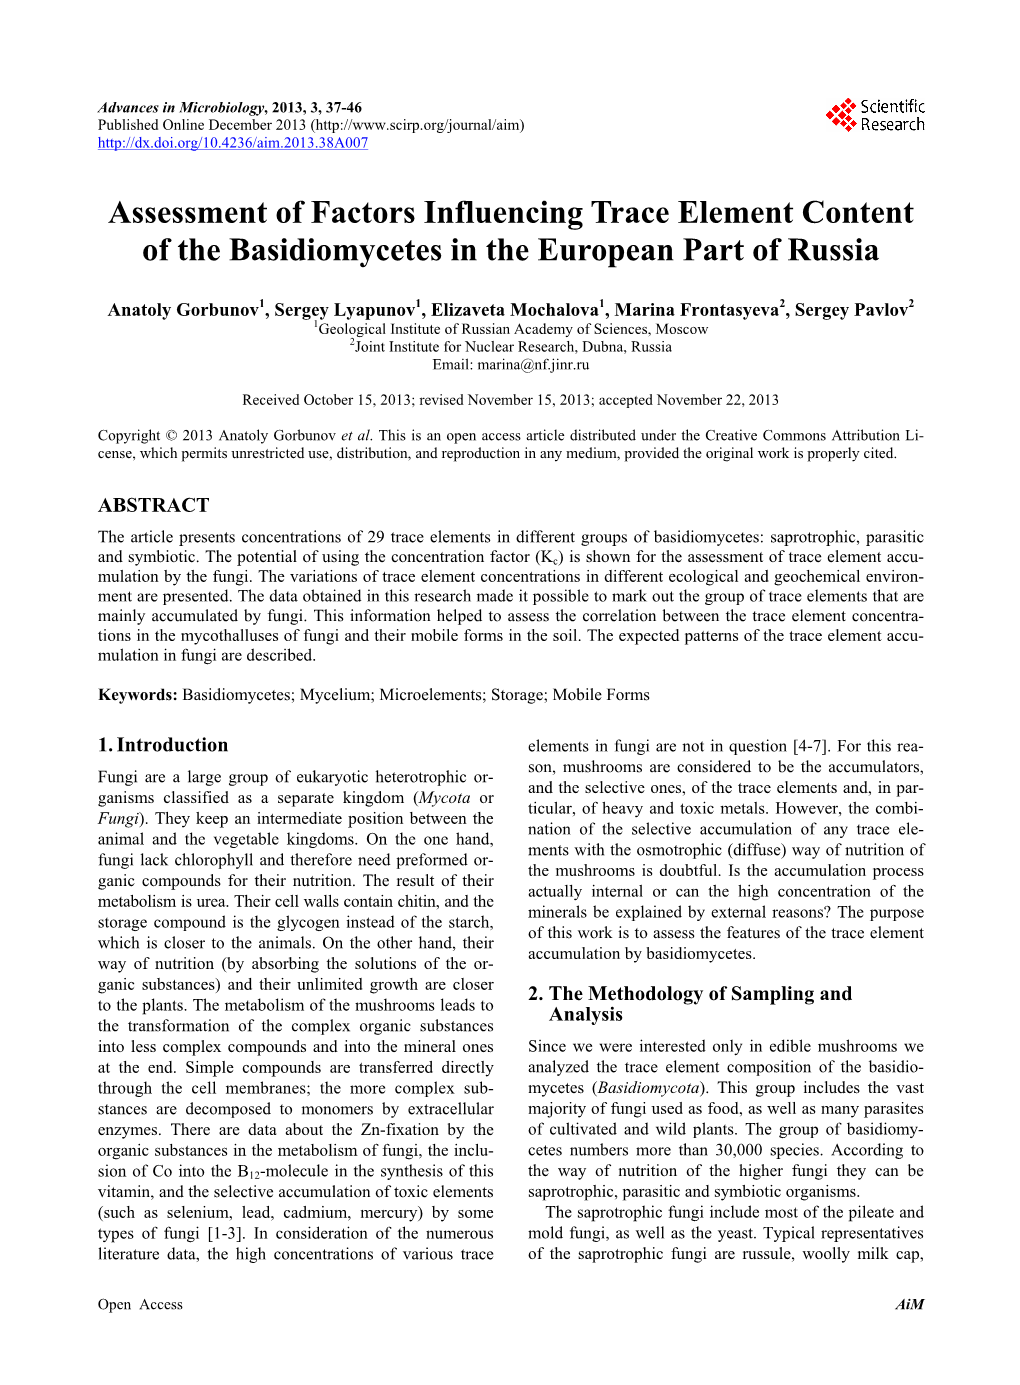 Assessment of Factors Influencing Trace Element Content of the Basidiomycetes in the European Part of Russia